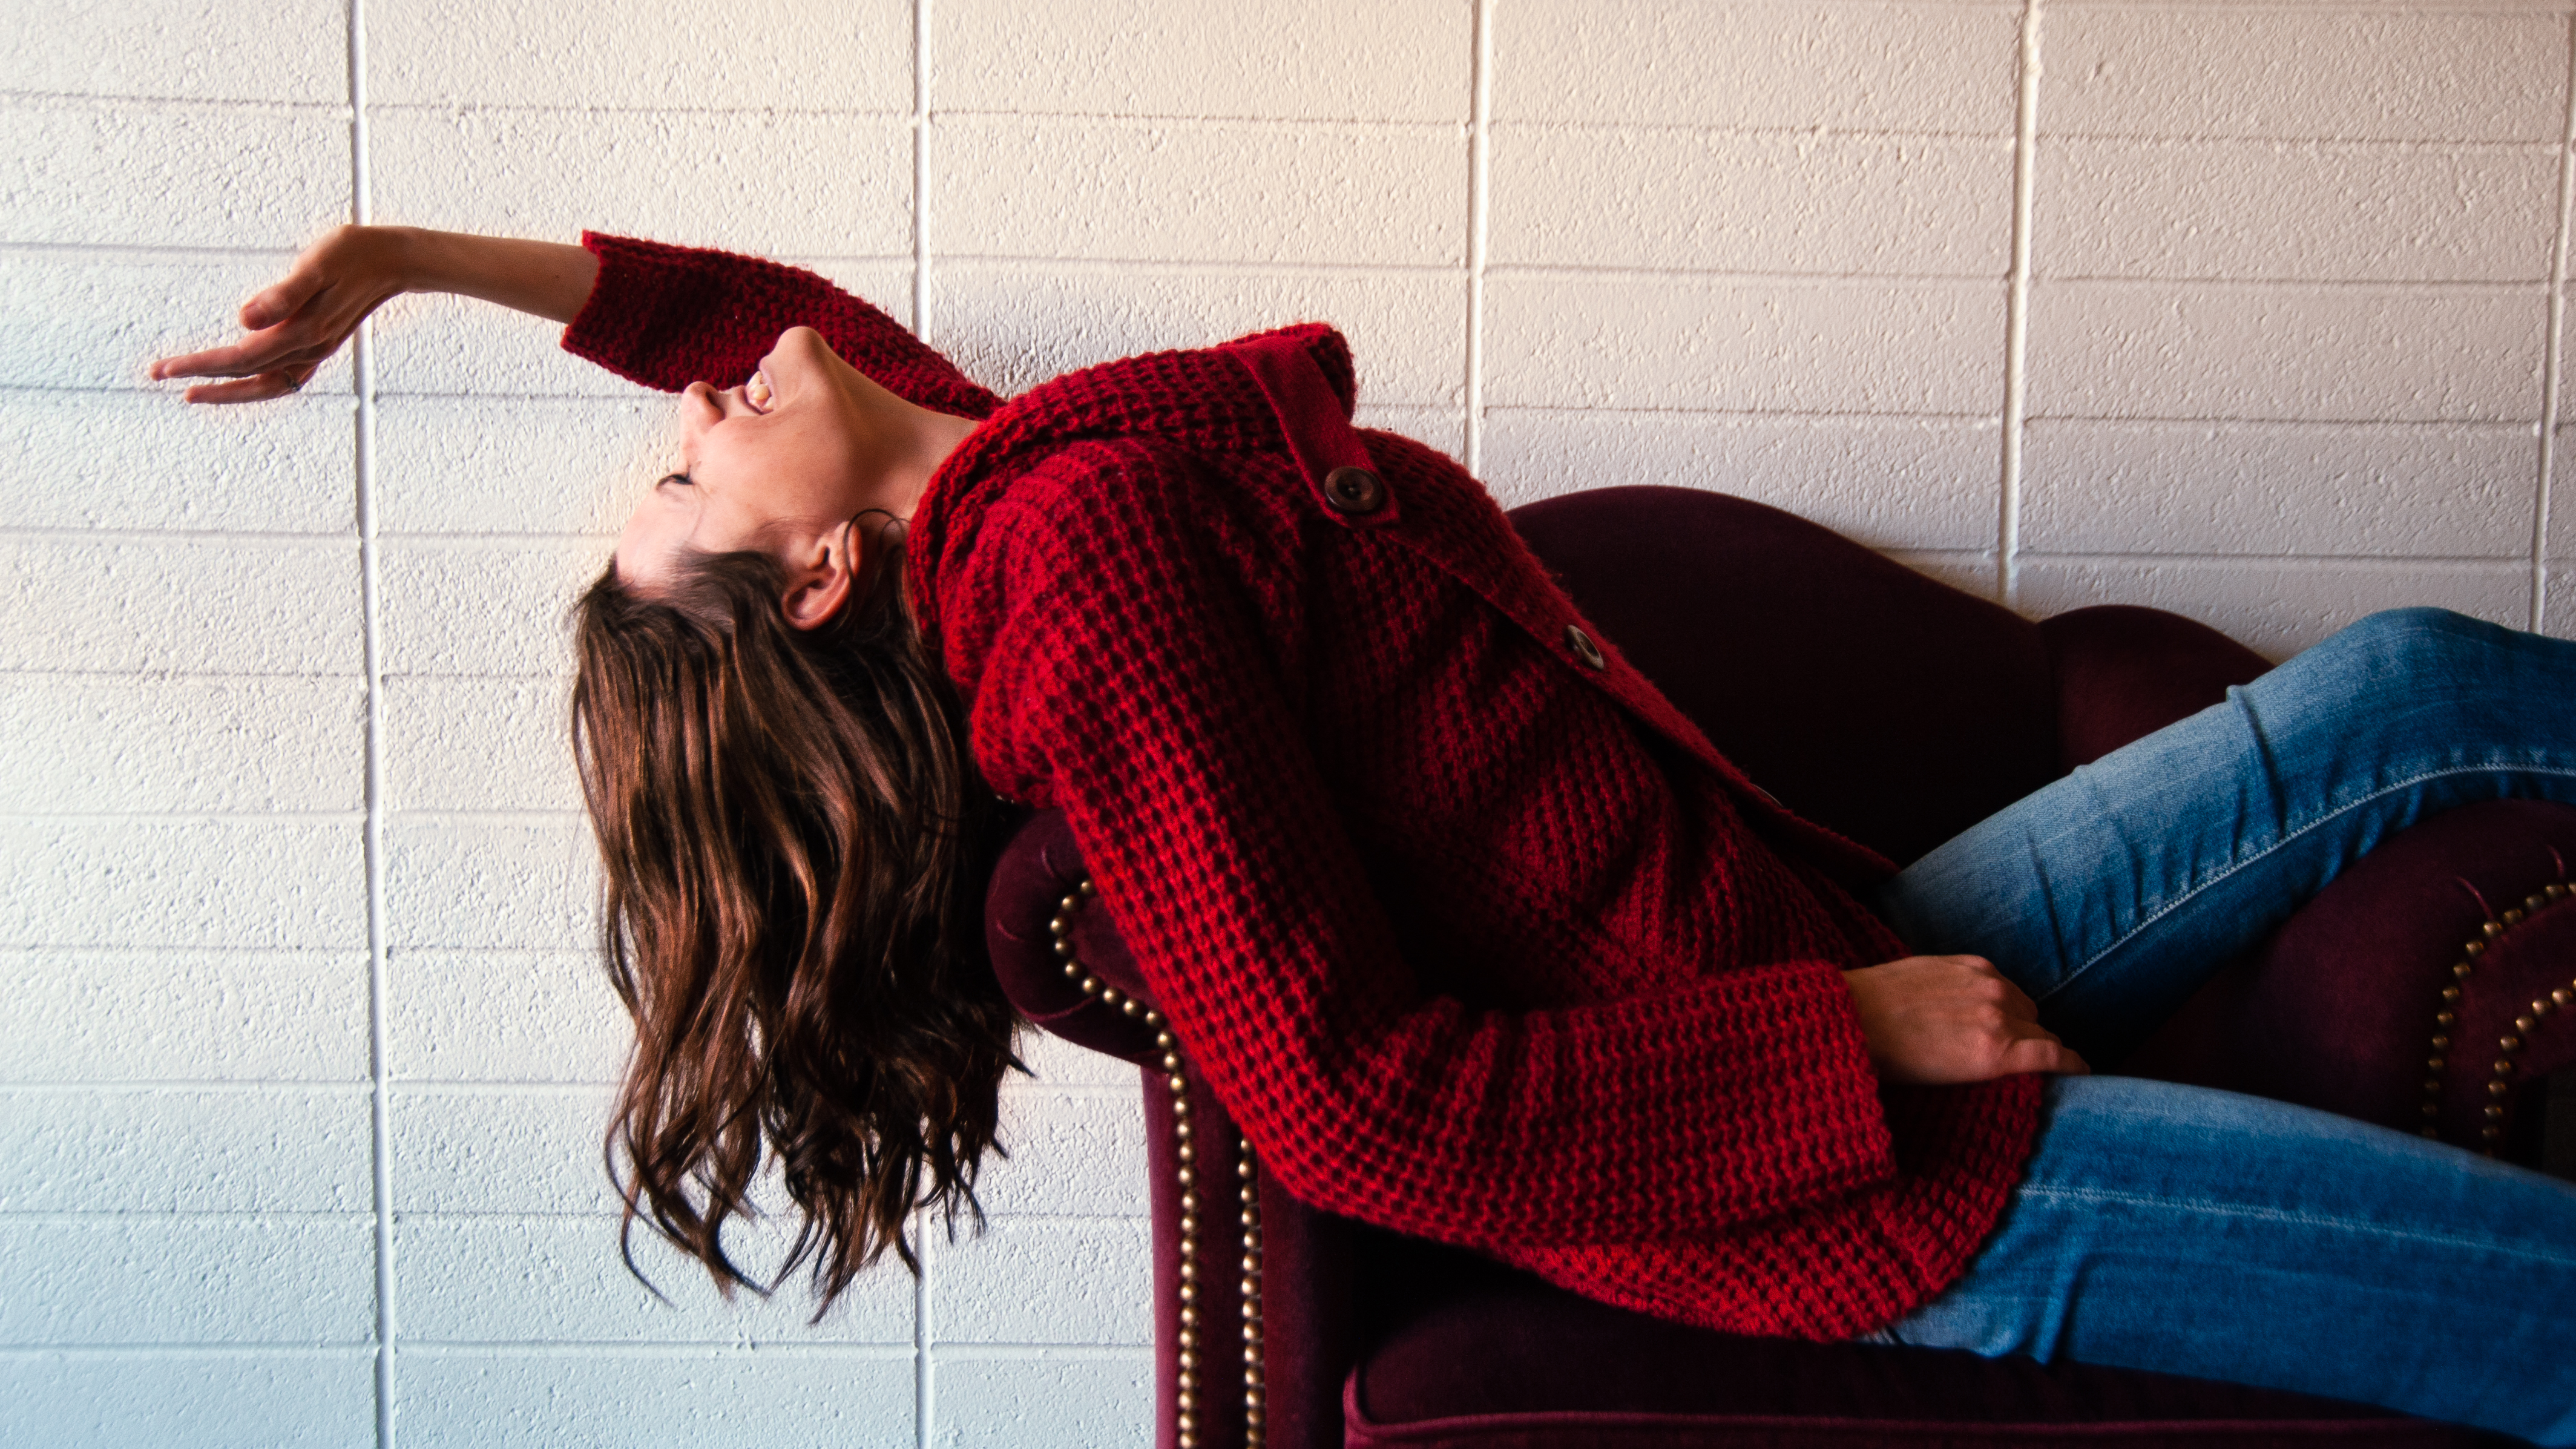 Diana lays down dramatically on couch in red sweater